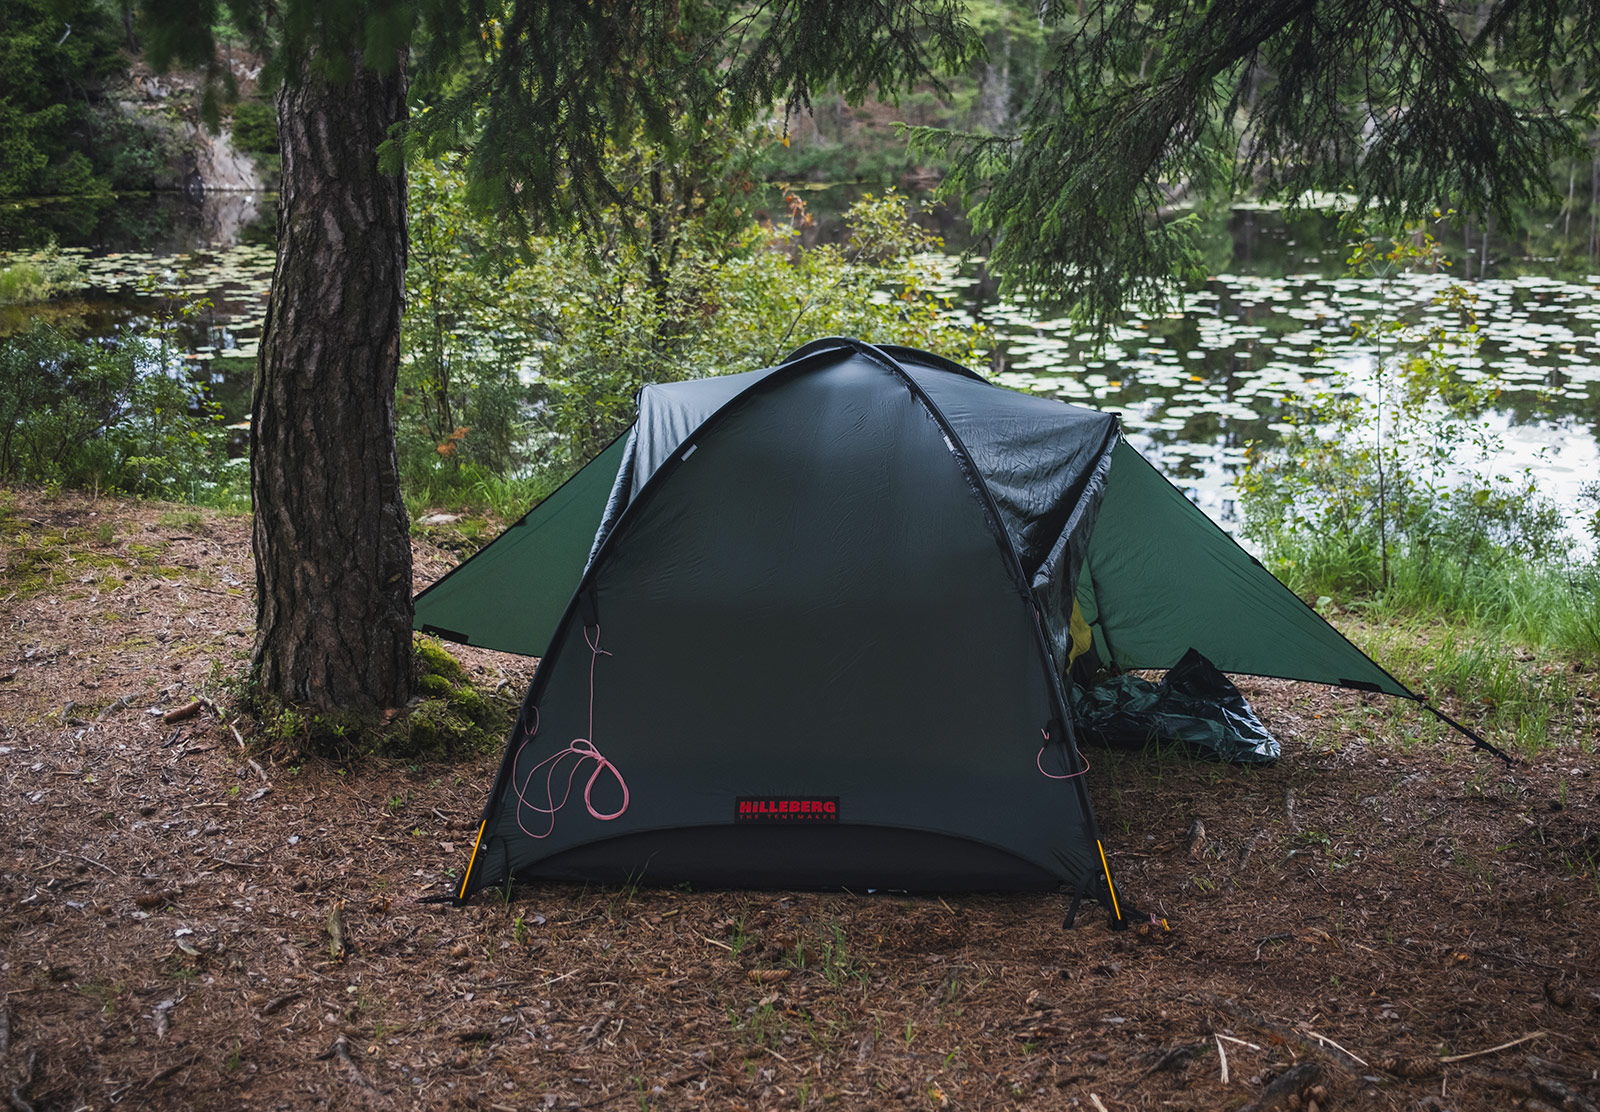 Tent pitched next to a lake